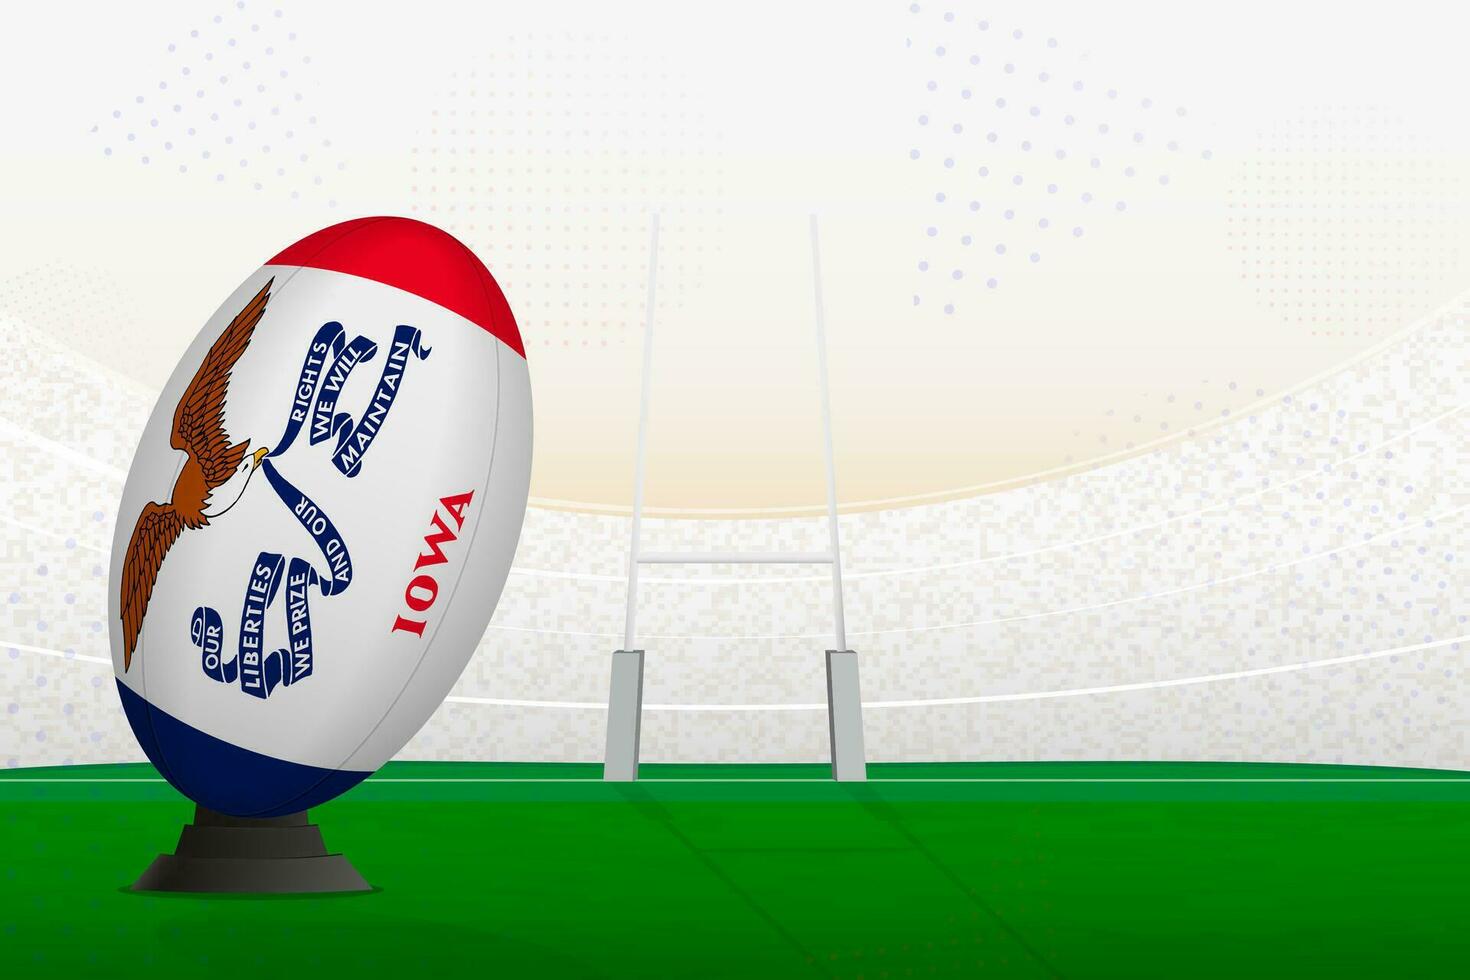 Iowa national team rugby ball on rugby stadium and goal posts, preparing for a penalty or free kick. vector